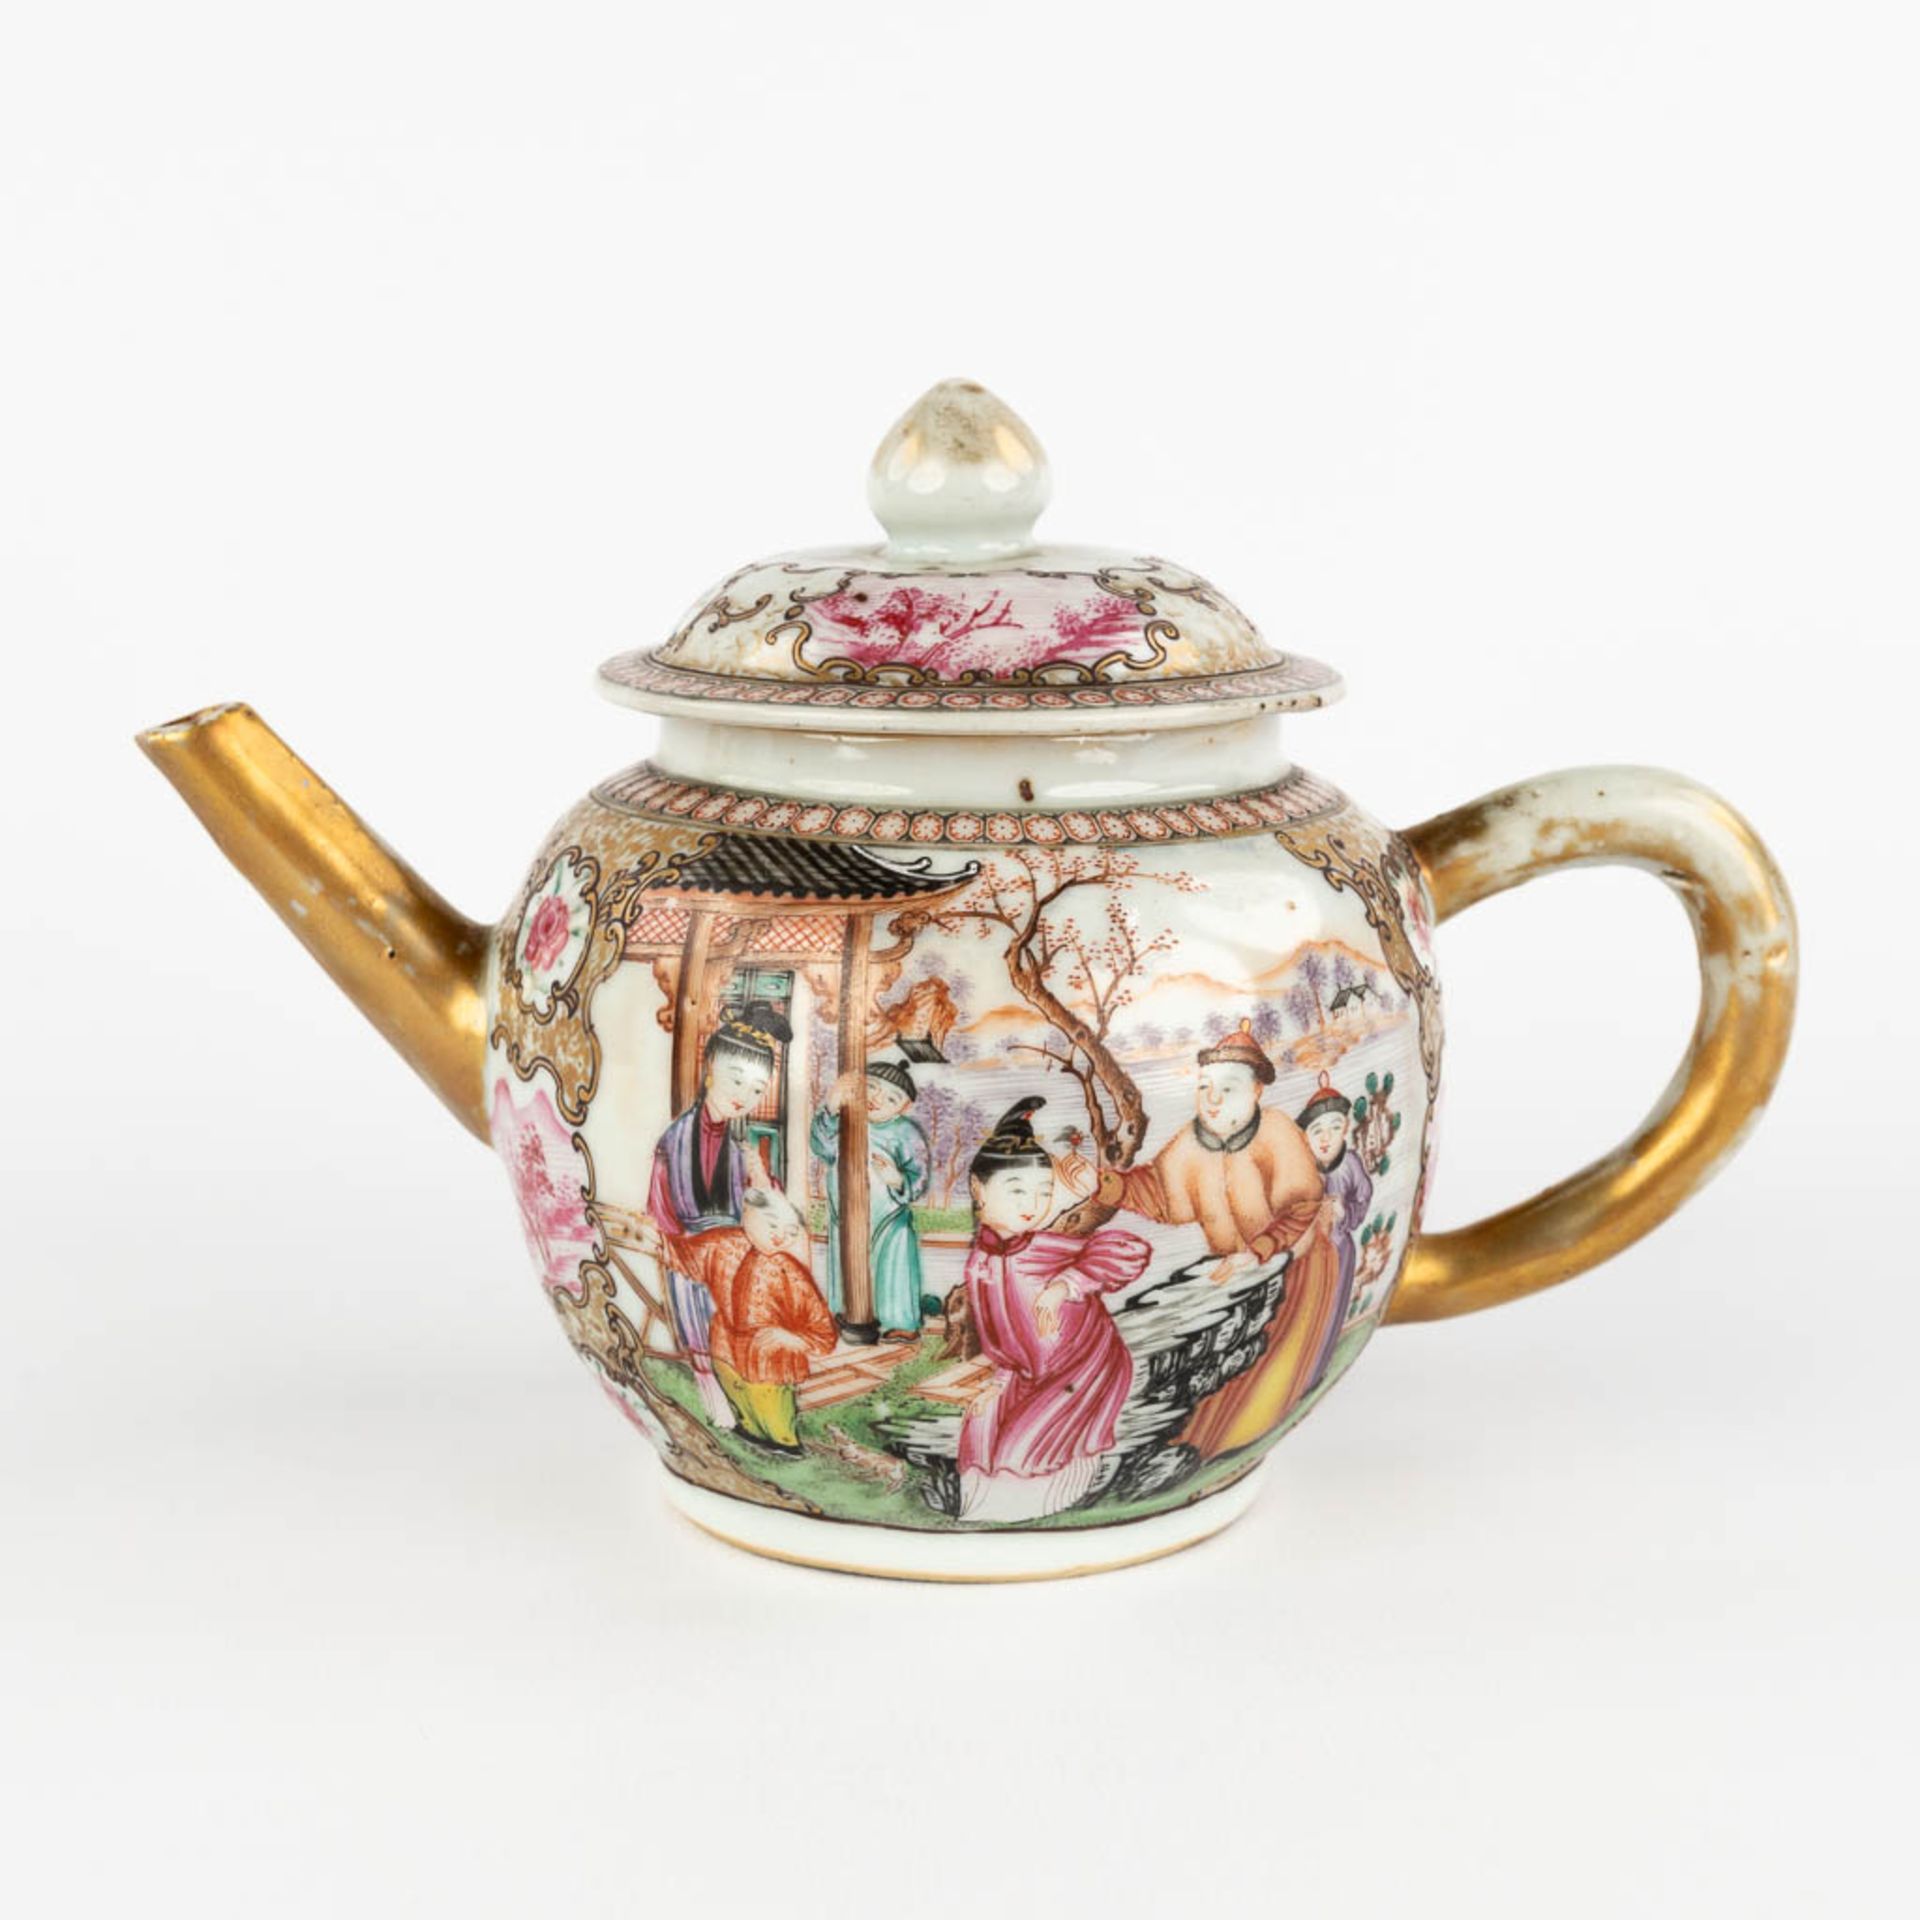 An antique Chinese Famille Rose teapot with a Family Scne, Qinalong, 18th C. (L:11 x W:20 x H:12,5